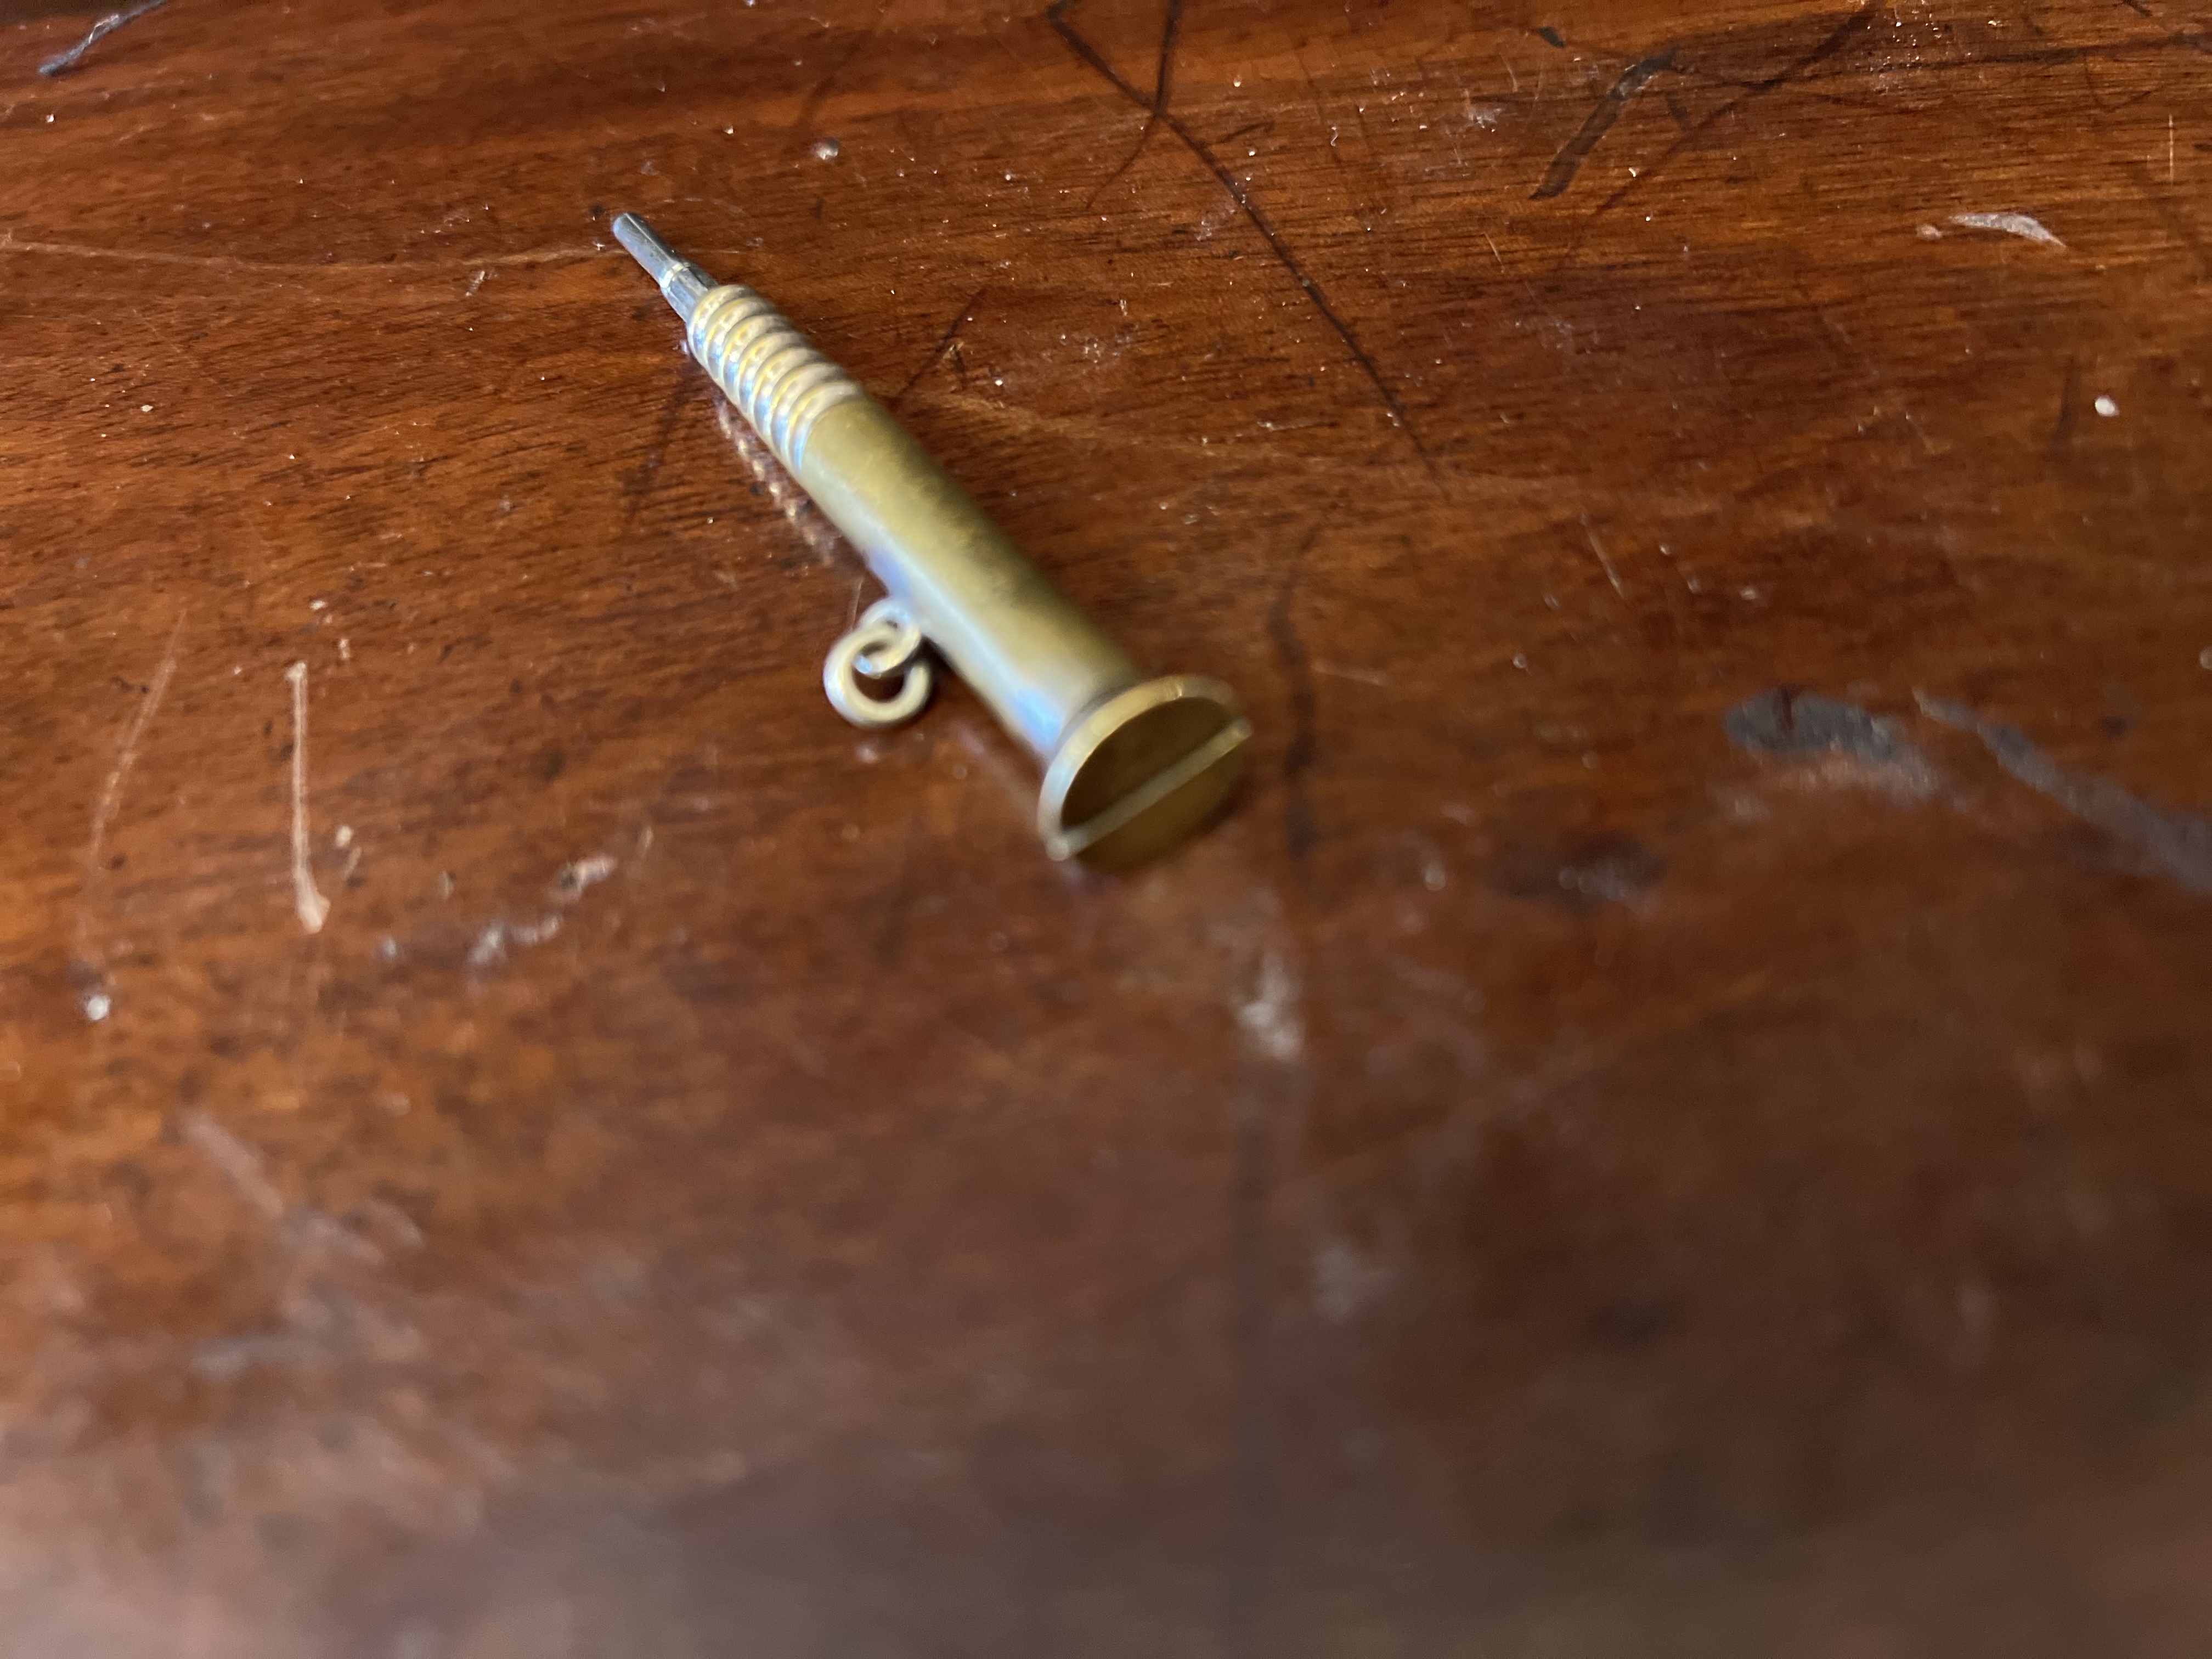 Edwardian Miniature Novelty Retractable Pencil Shaped As a Wood Screw - Image 2 of 4